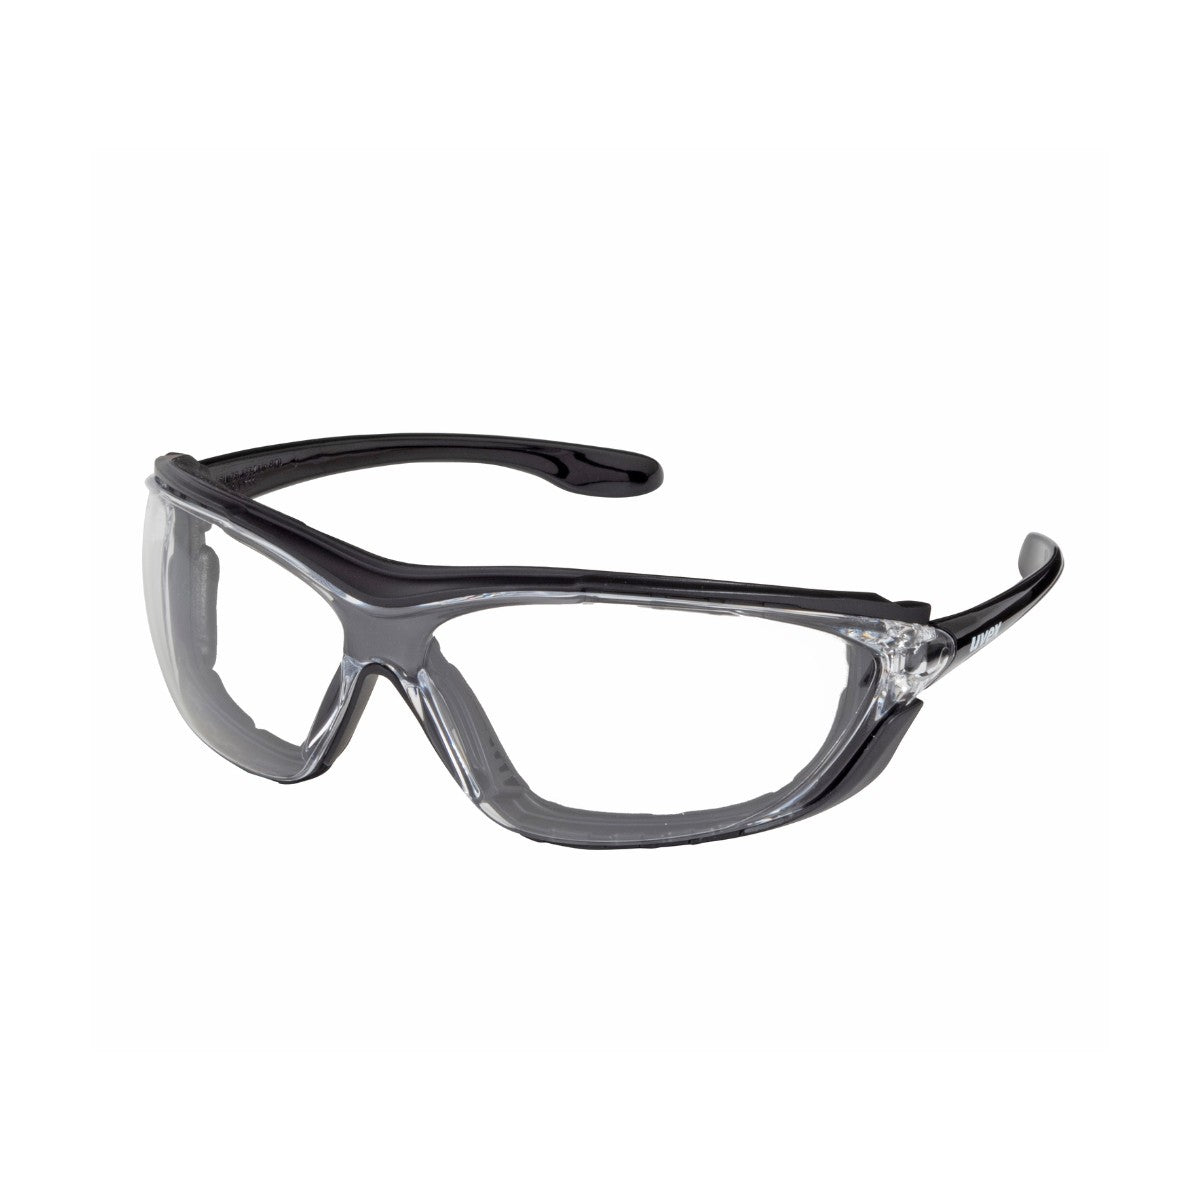 uvex Hunter Glasses With Foam Guard - Clear Lens 9101-050G (Pack of 5)